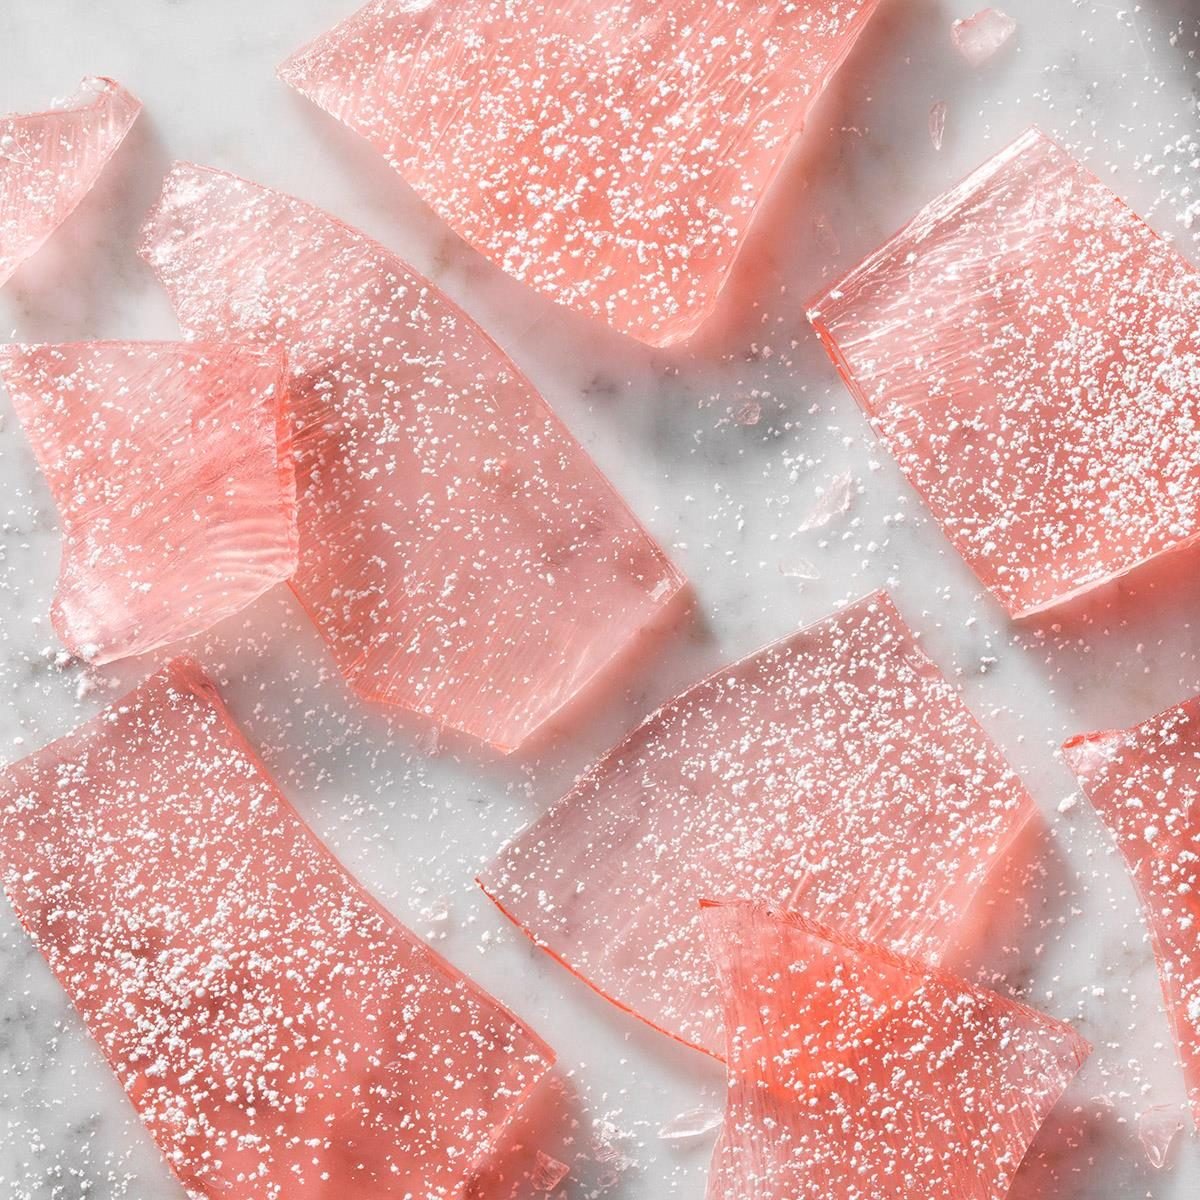 Old-Fashioned Homemade Hard Candy Recipe